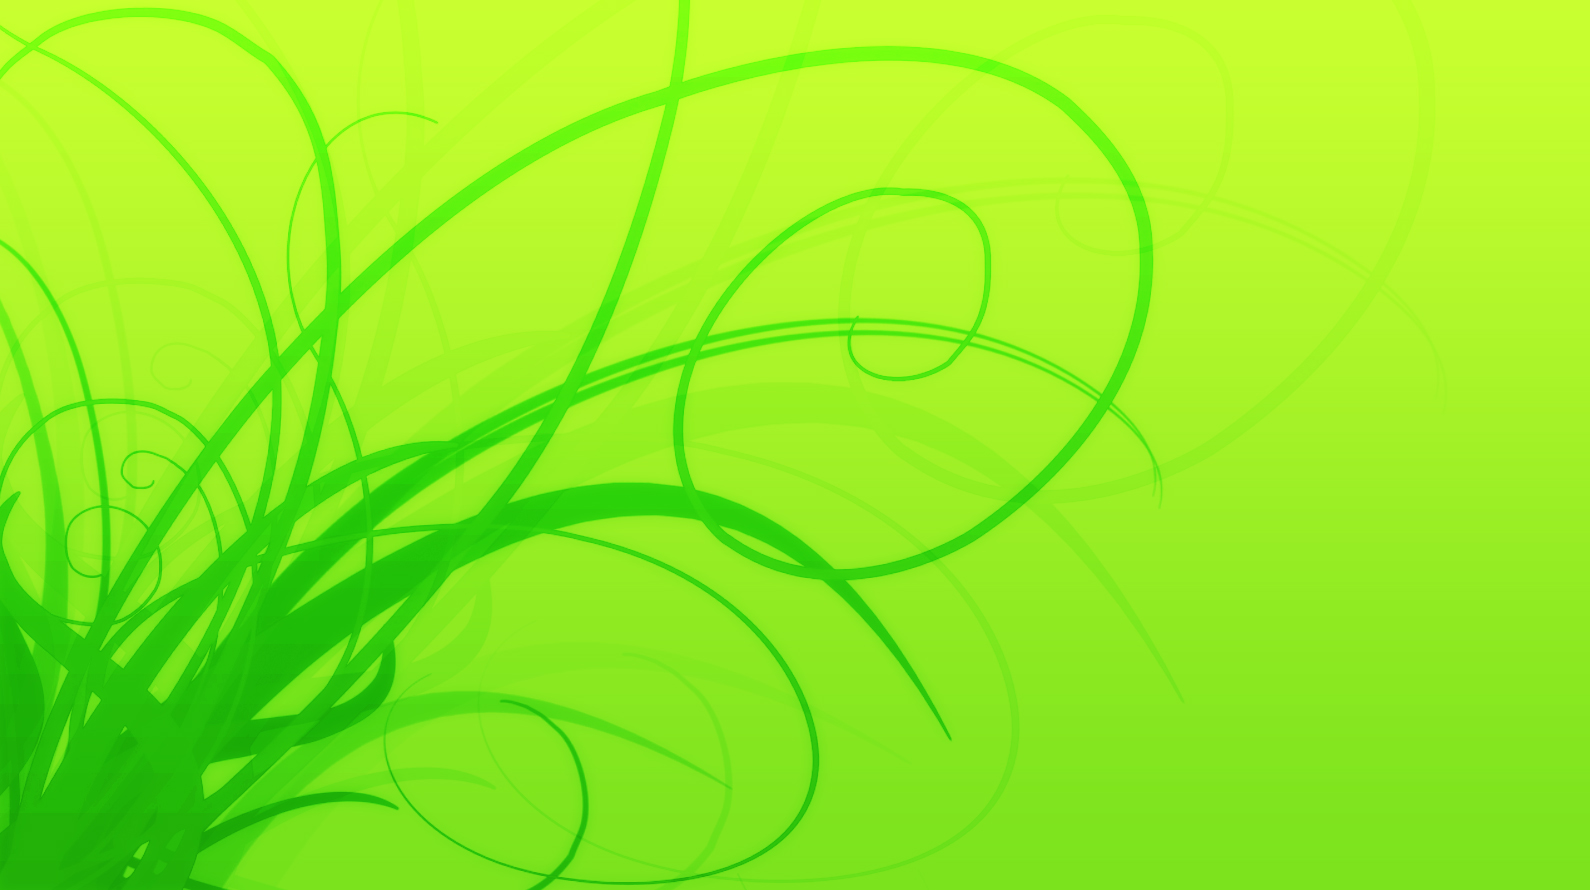 Neon green backgrounds